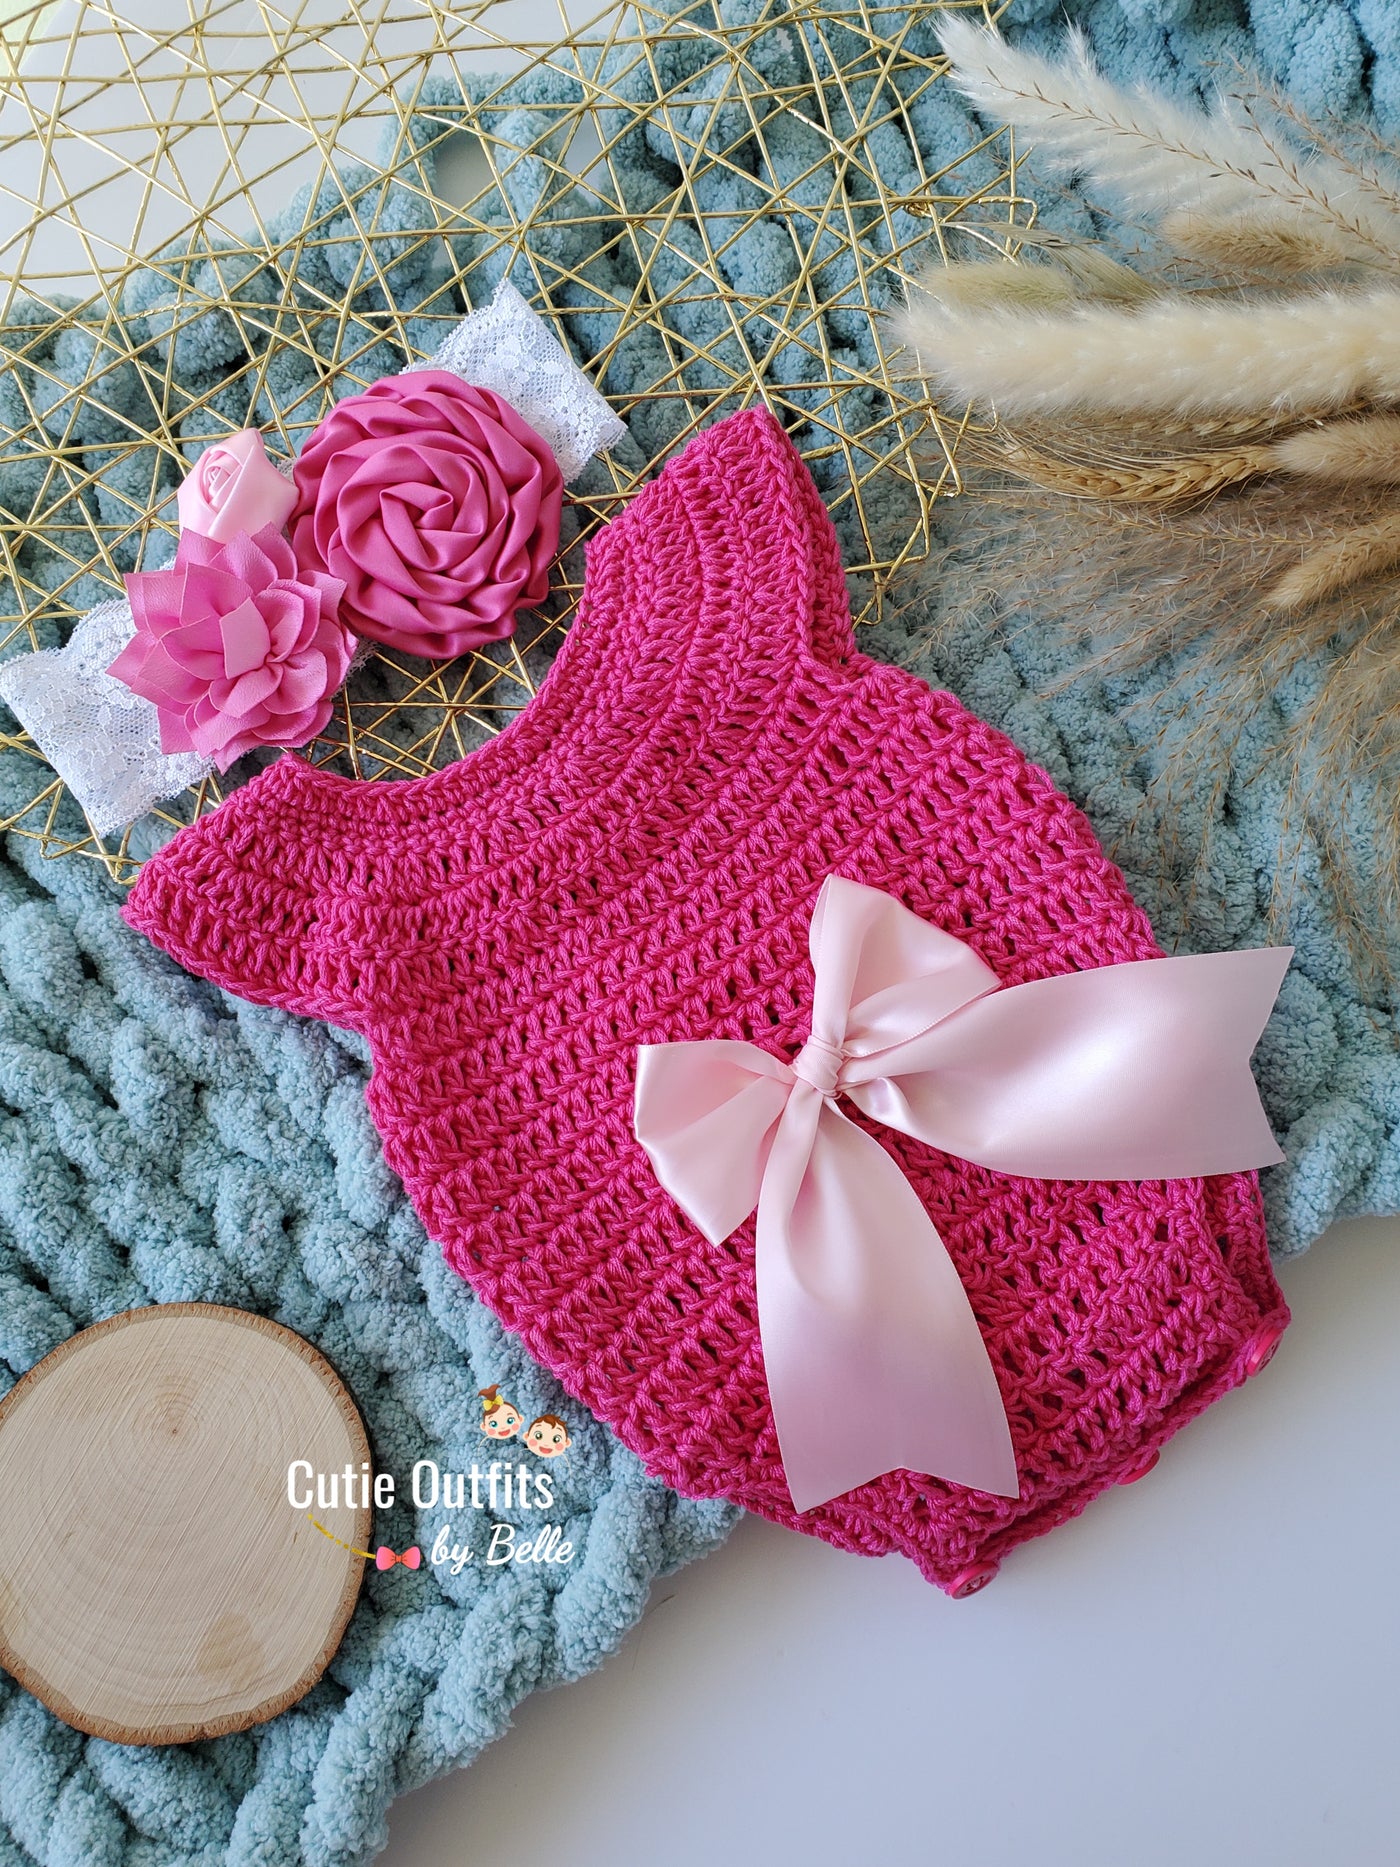 Hot Pink Crochet Baby Romper, Cotton Baby Outfit, Crochet Baby Gift